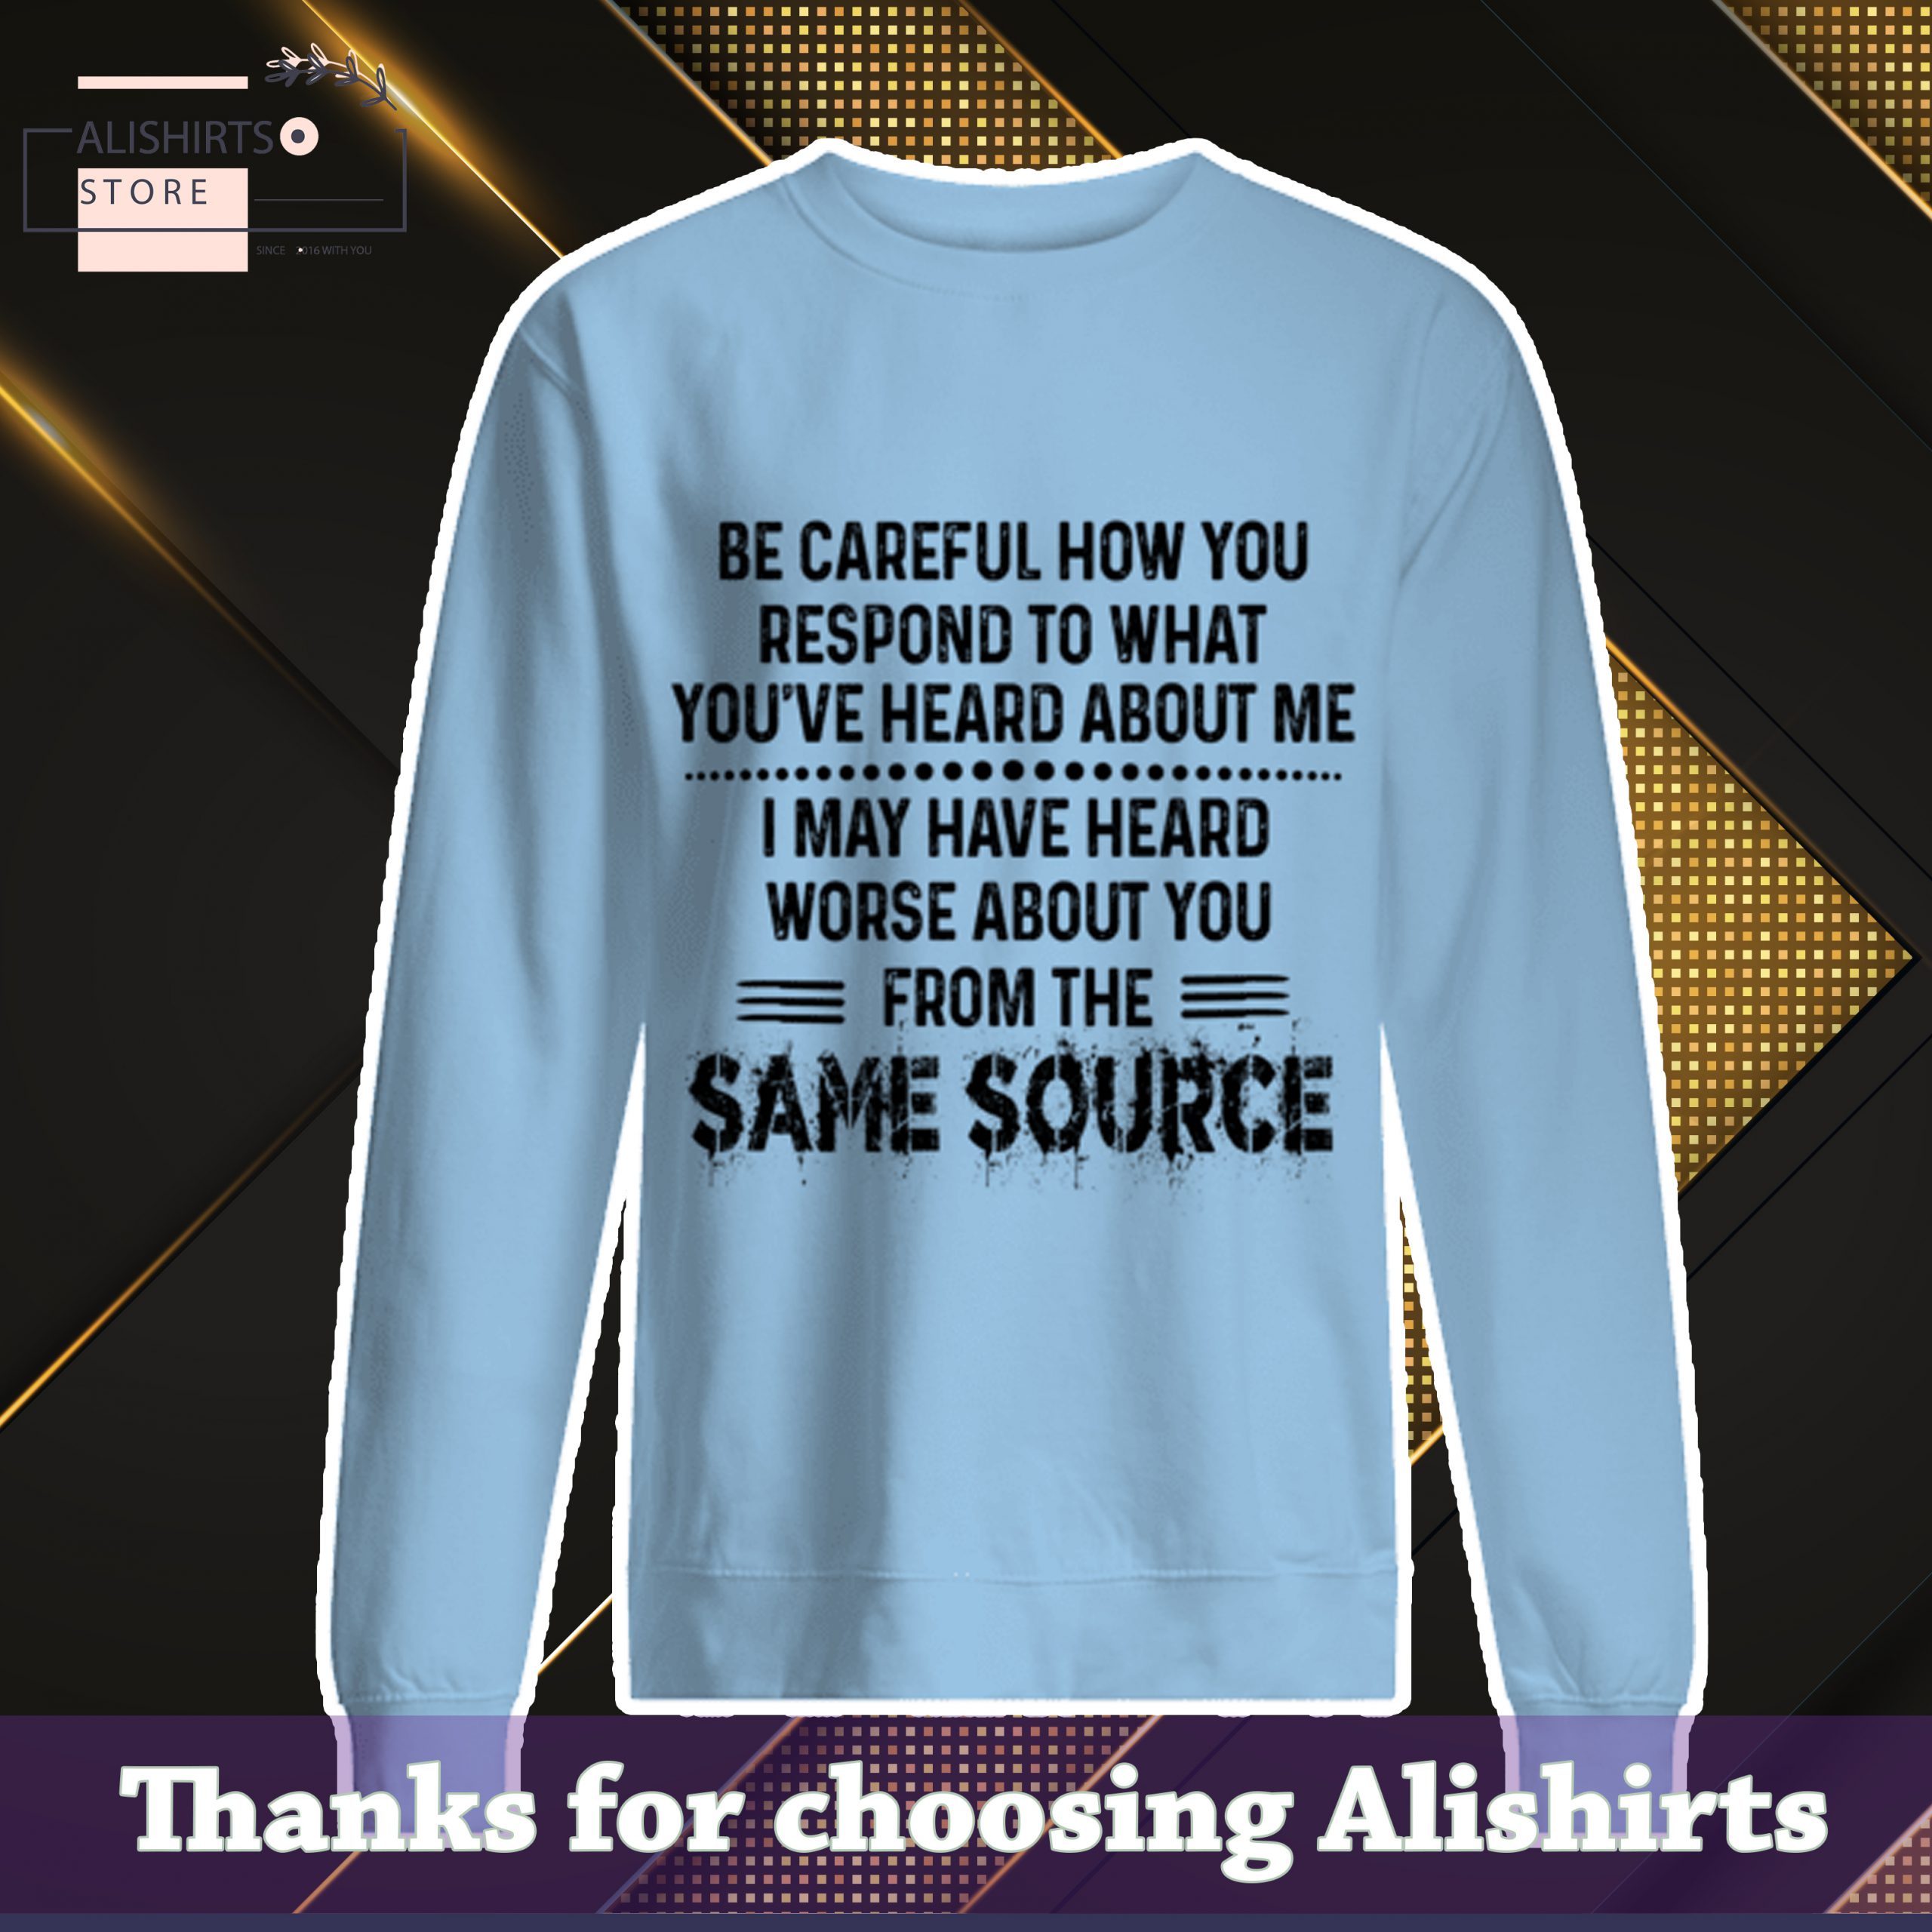 Be careful how to respond to what you have heard about Me I may have heard worse about you from the same source shirt